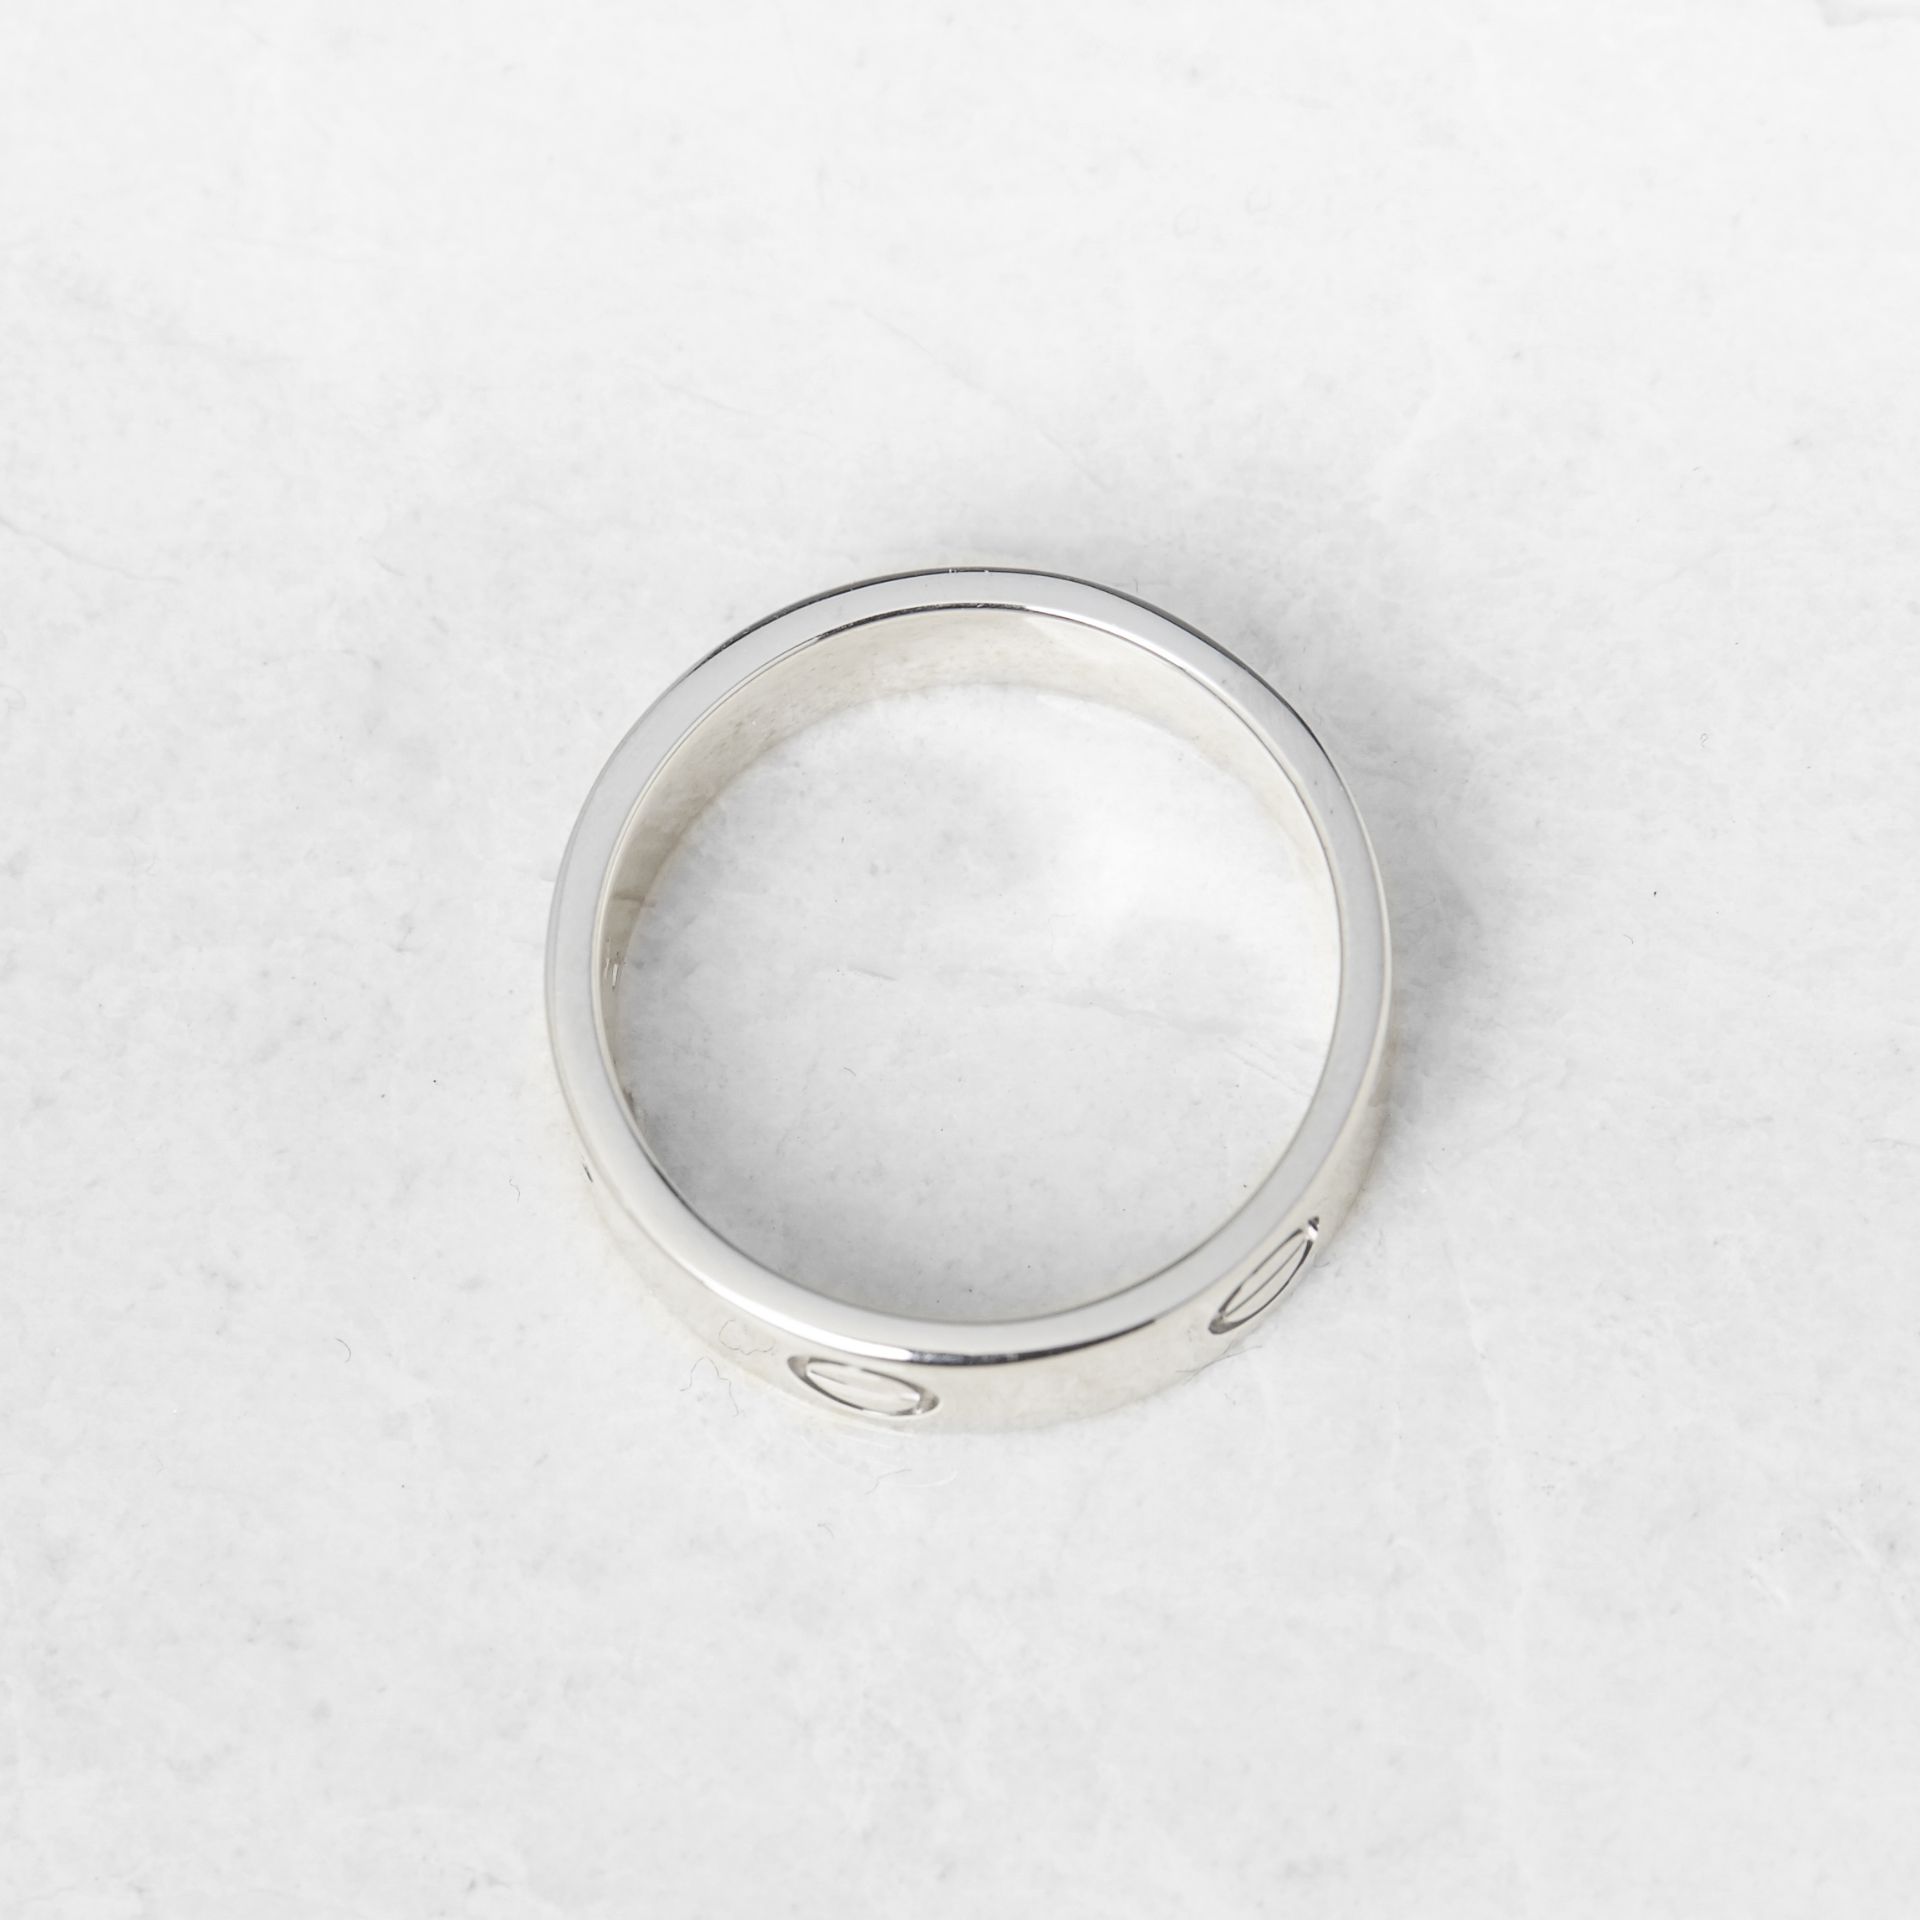 Cartier 18k White Gold Love Ring - Image 5 of 7